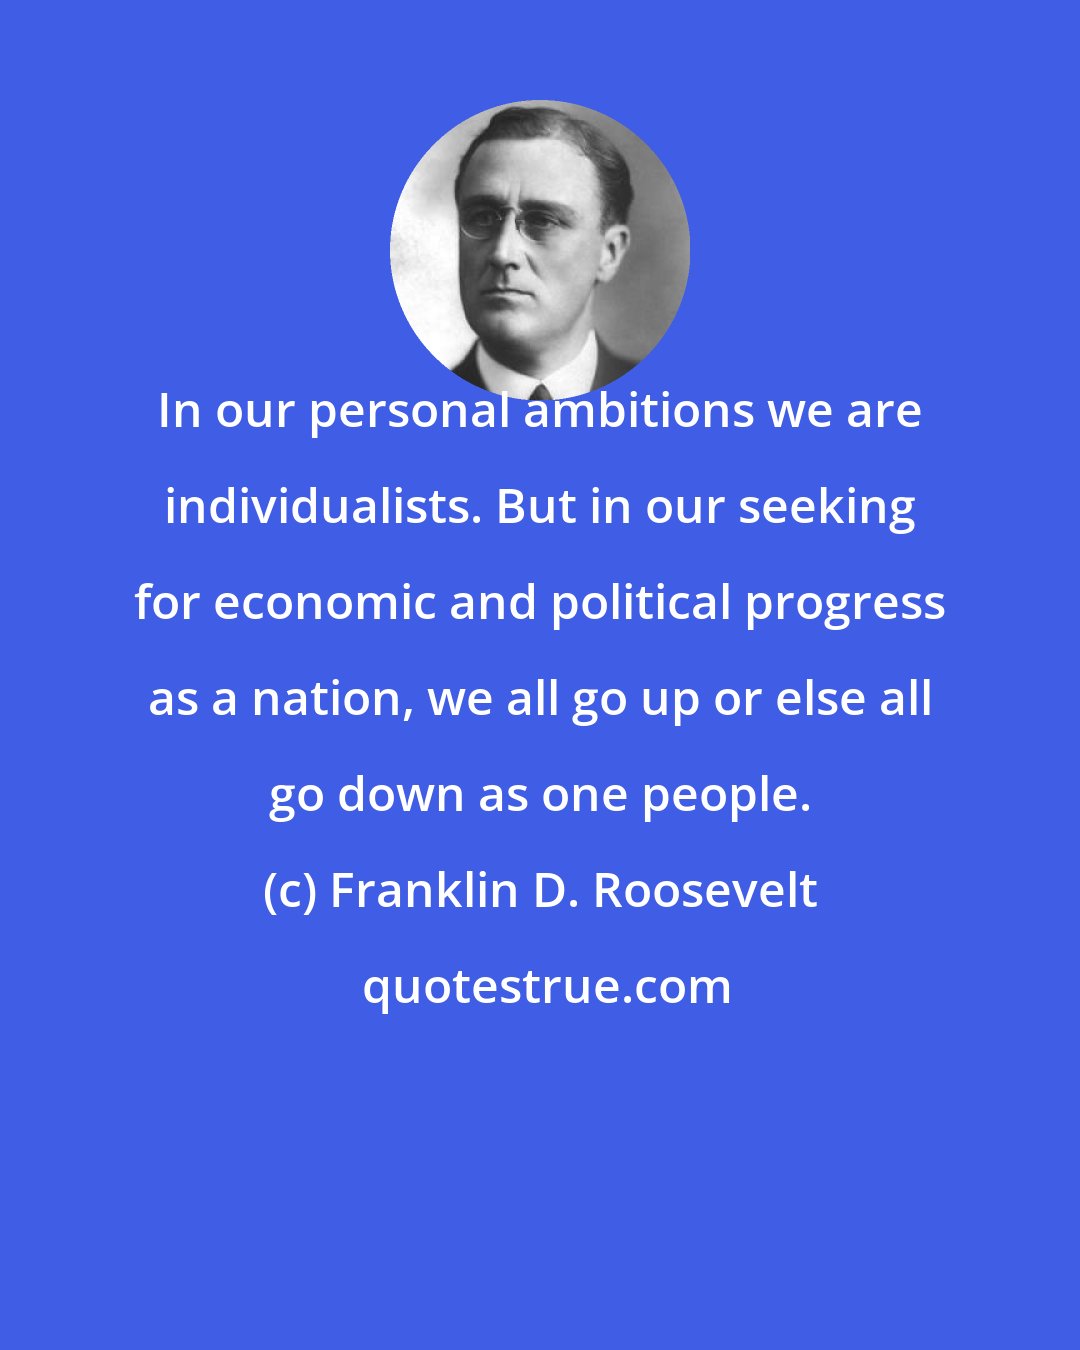 Franklin D. Roosevelt: In our personal ambitions we are individualists. But in our seeking for economic and political progress as a nation, we all go up or else all go down as one people.